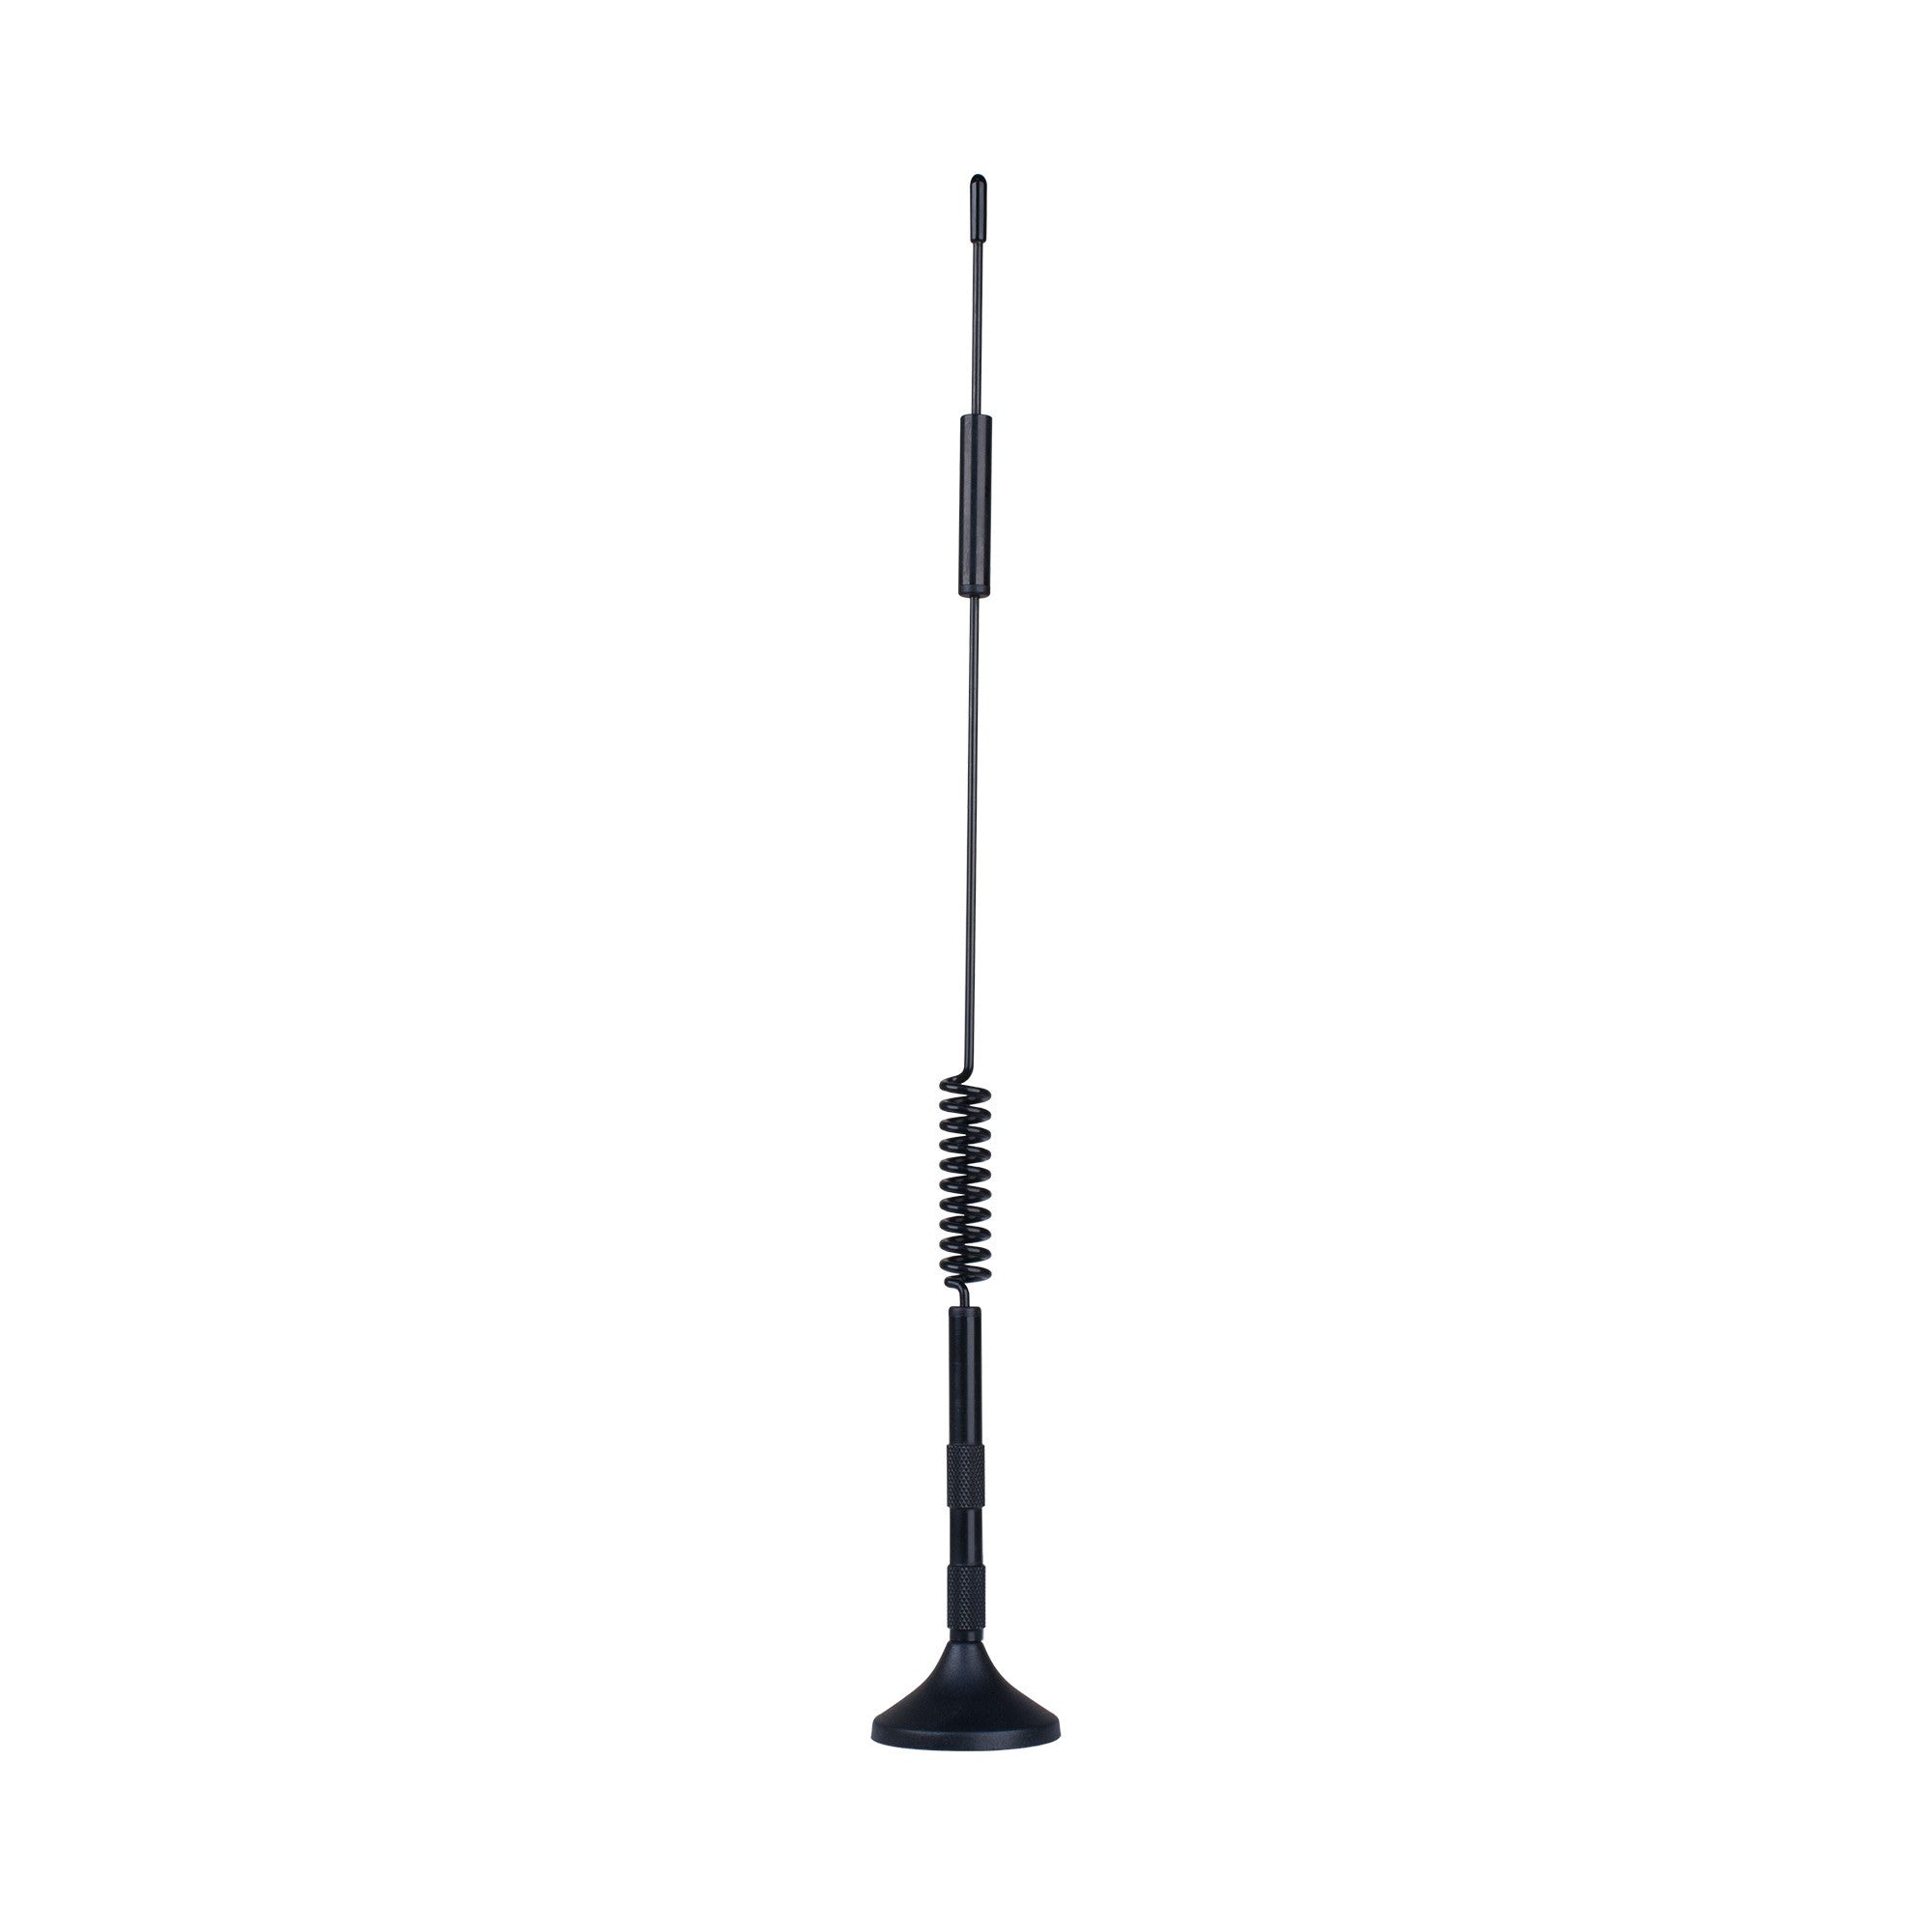 weBoost Magnet Mount Vehicle Antenna 12 in. w/ 10 ft. RG-174 Cable TNC - 15-03883